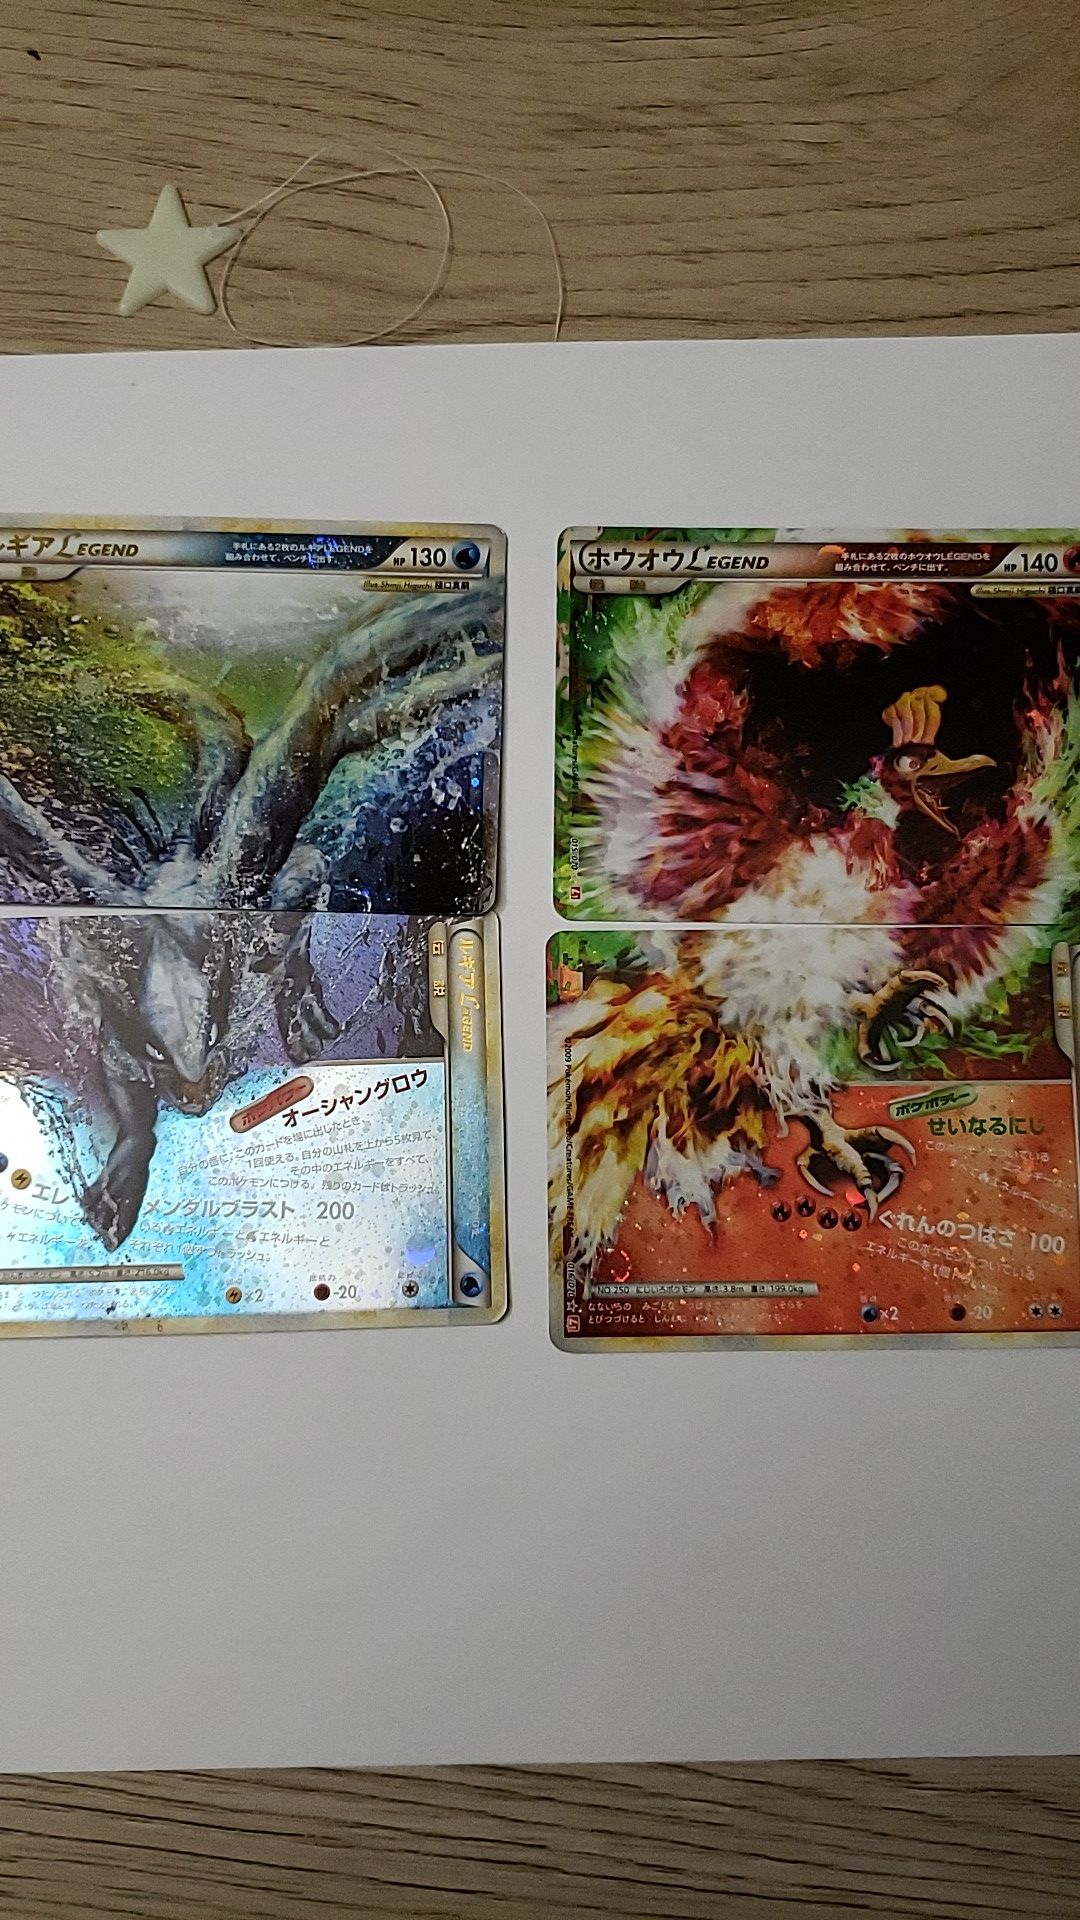 1st edition Lugia & Ho-oh legend japanese cards